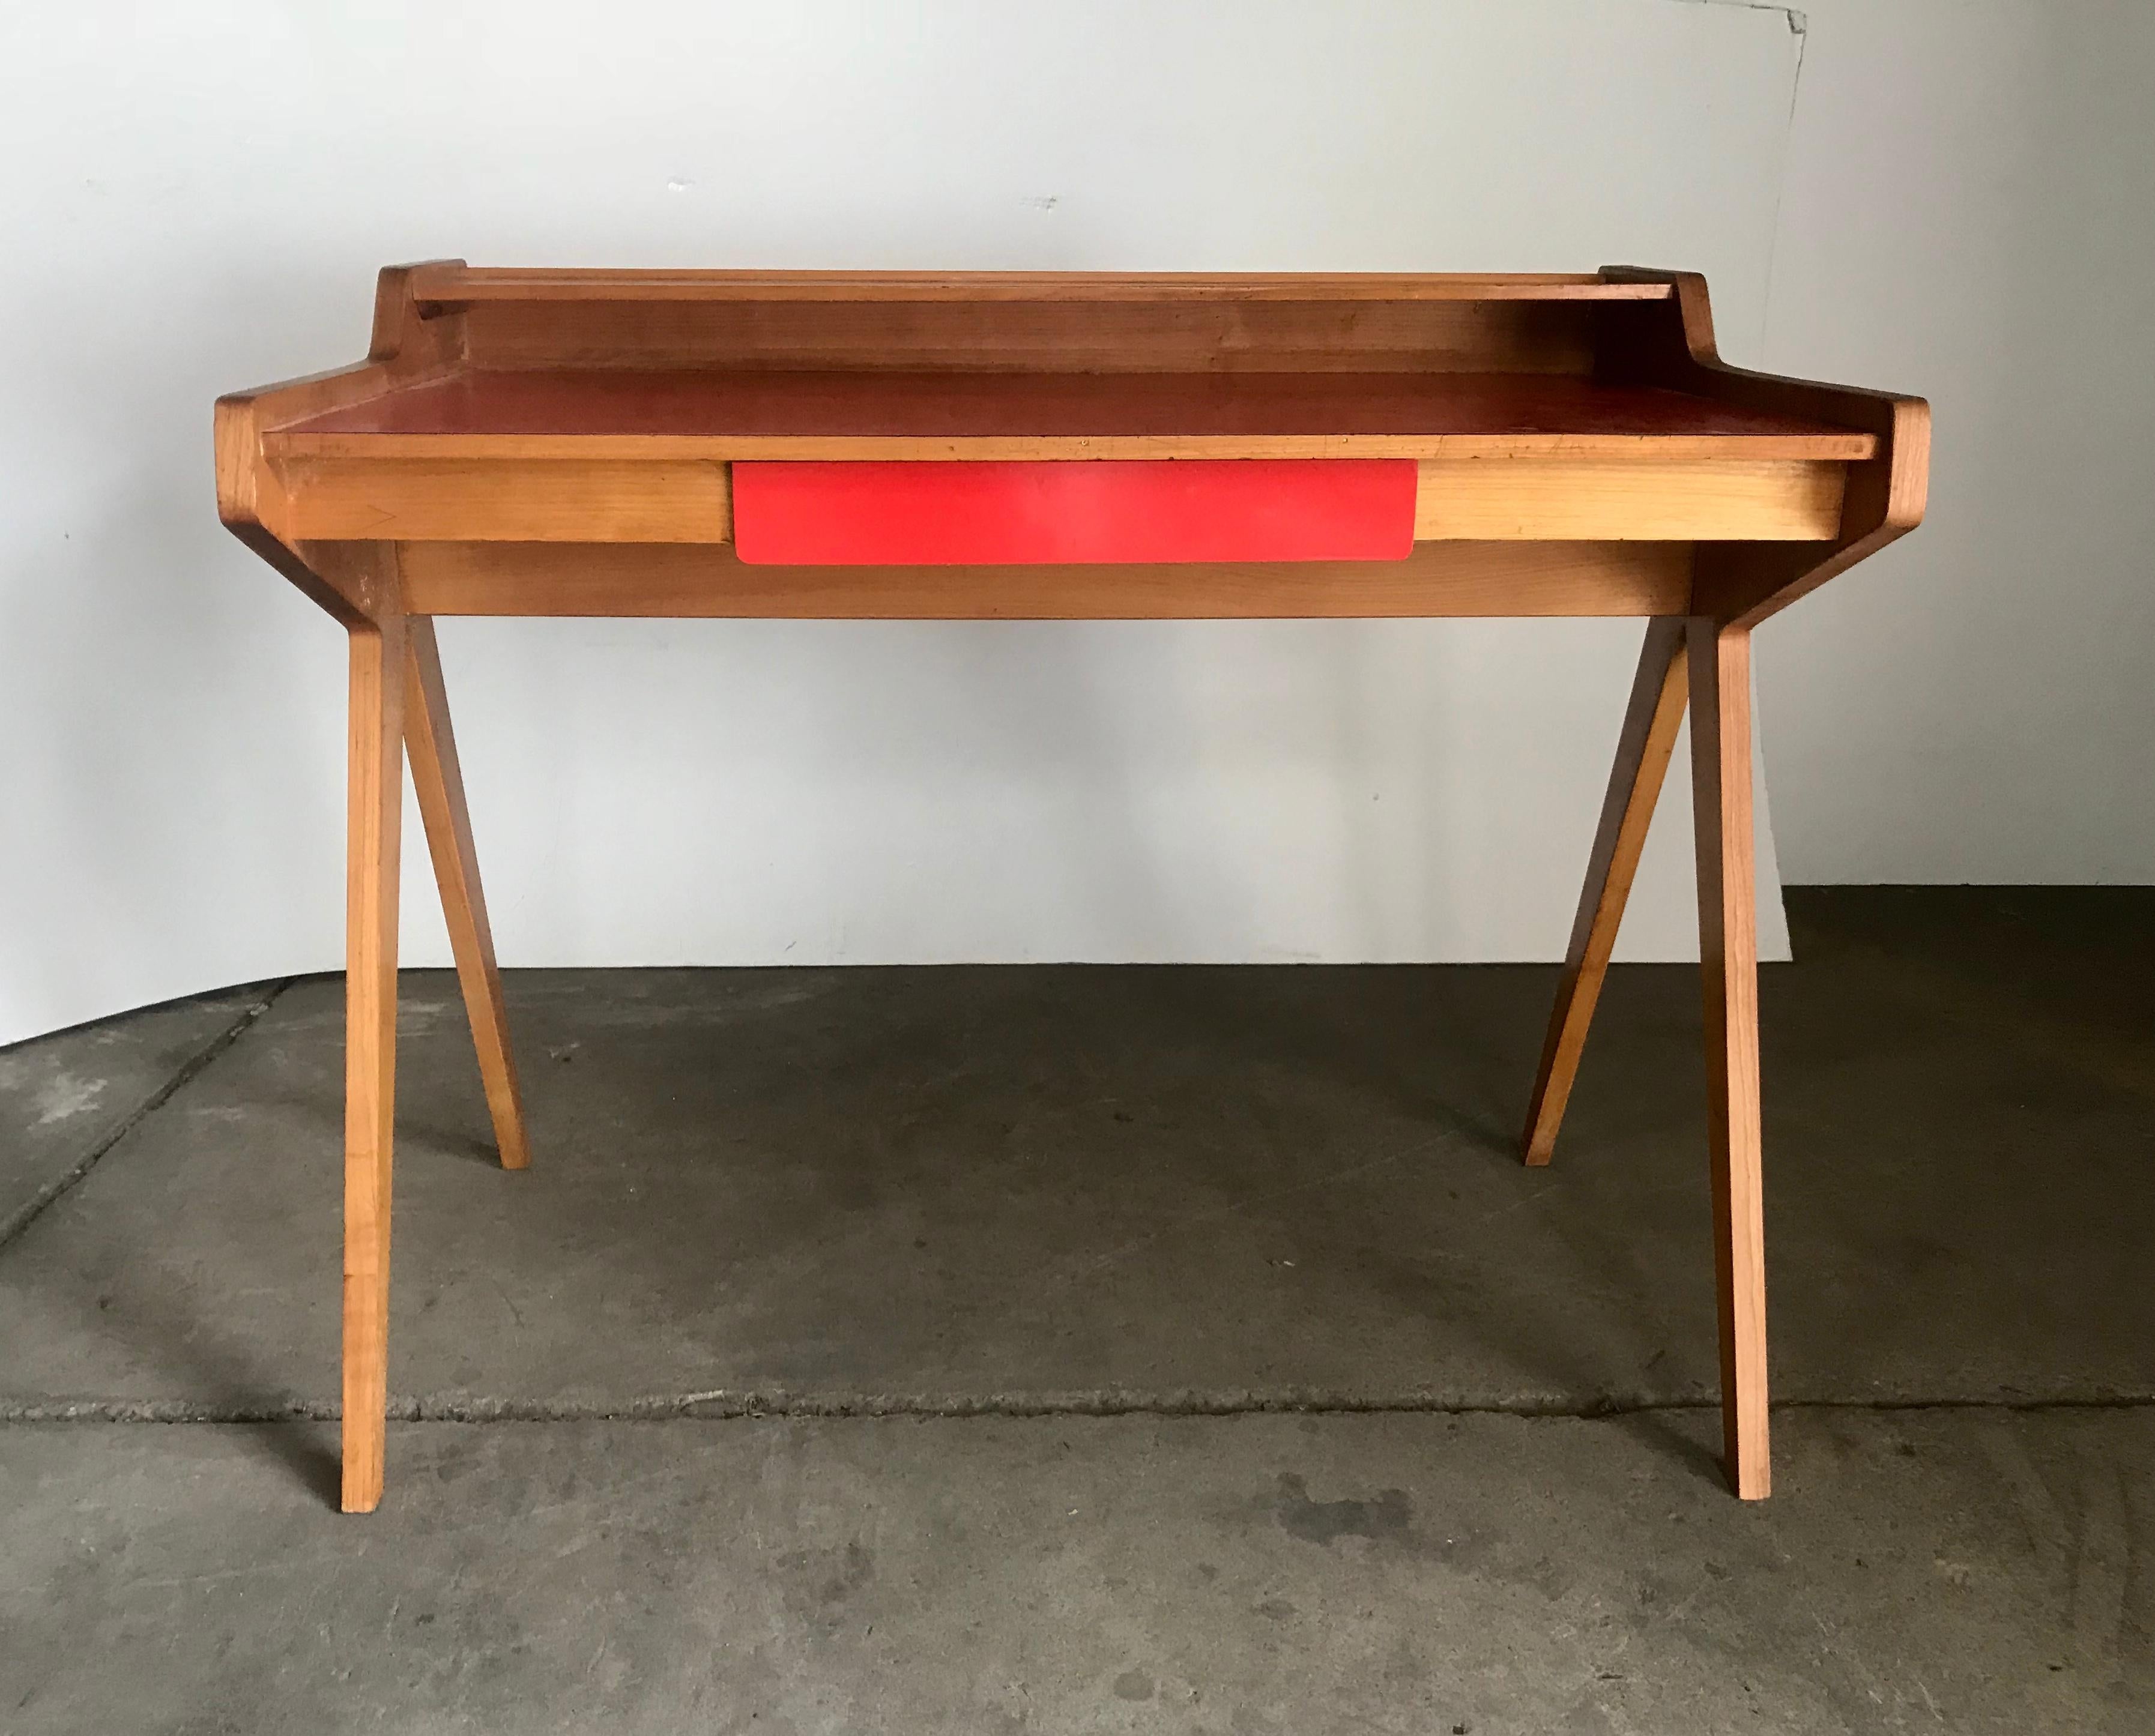 Beautiful desk or writing table designed by Helmut Magg for WK Möbel, Germany, 1955, nice original condition. Features nutwood and red lacquer desk top surface and drawer,..( a bit rarer) Hand delivery avail to New York City or anywhere en route